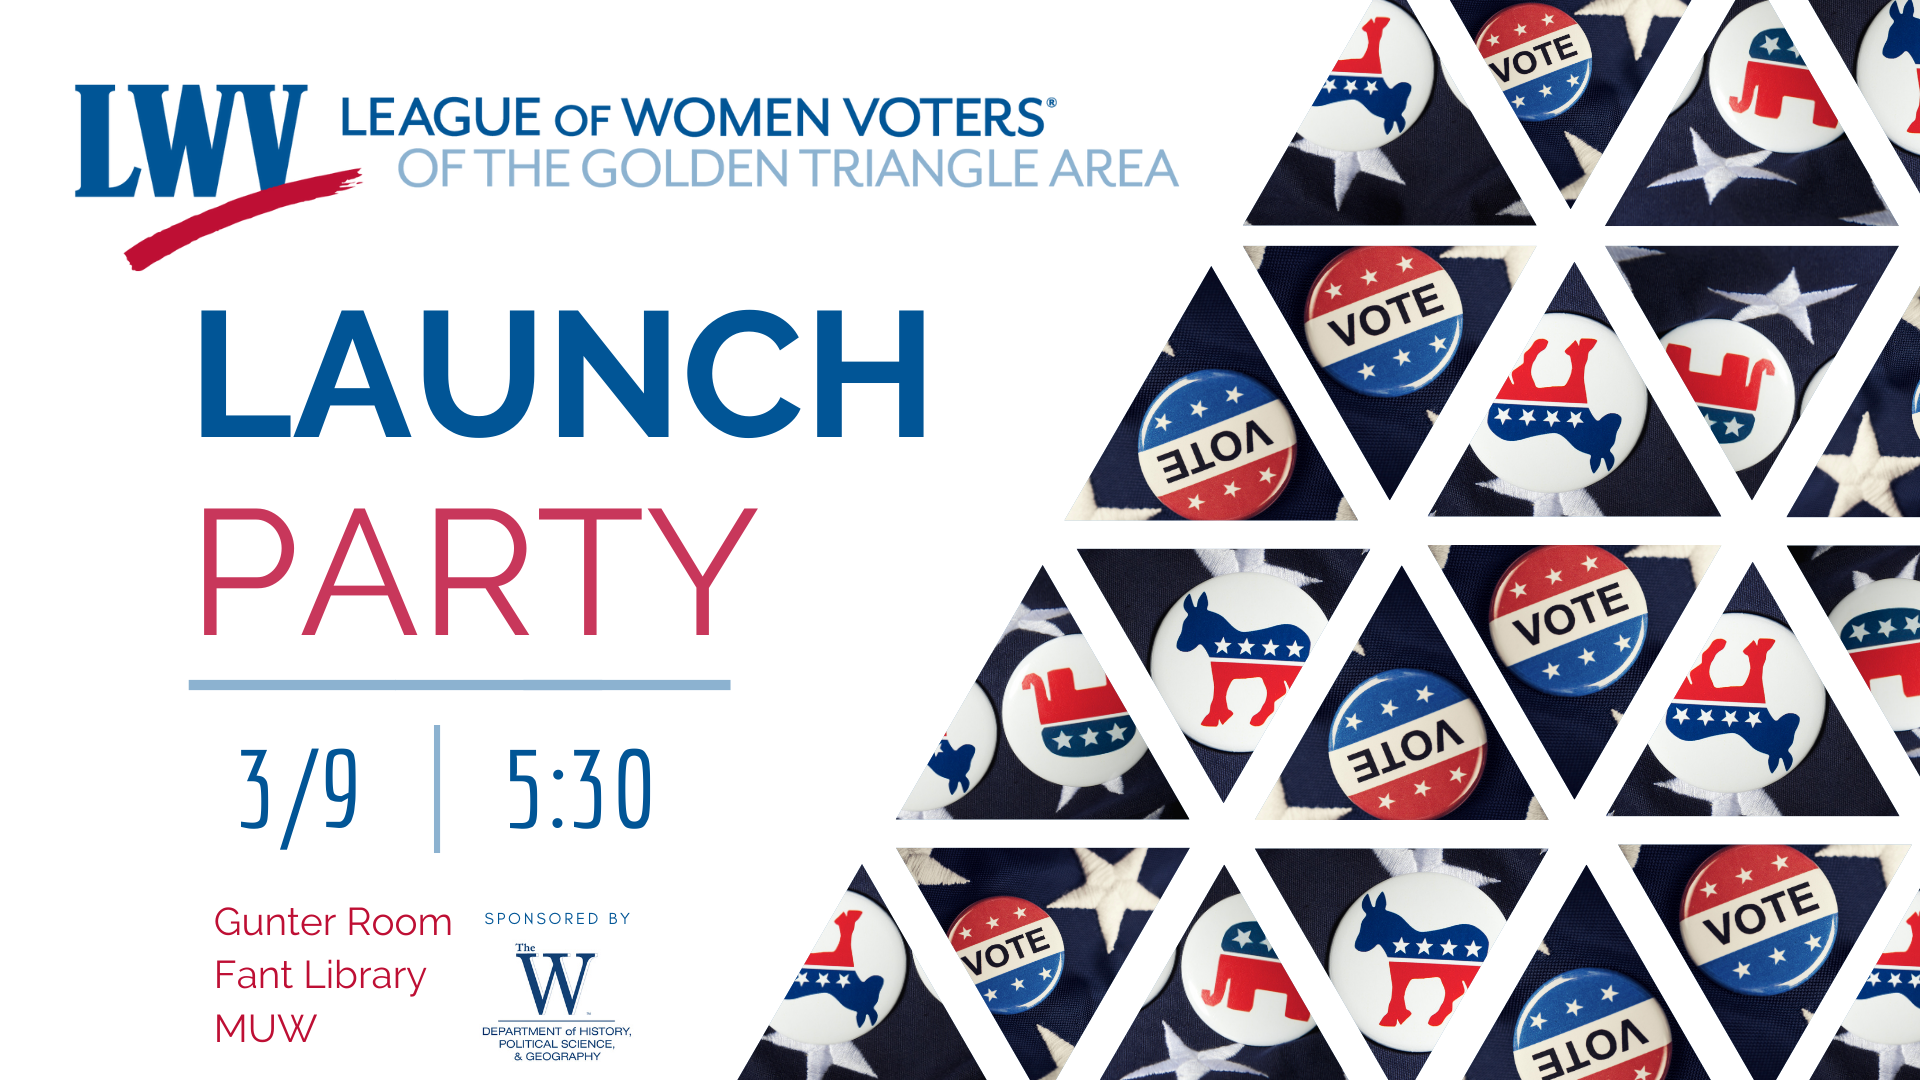 League of Women Voters Launch Party March 9 at 5:30 pm Fant Library Gunter Multipurpose Room.